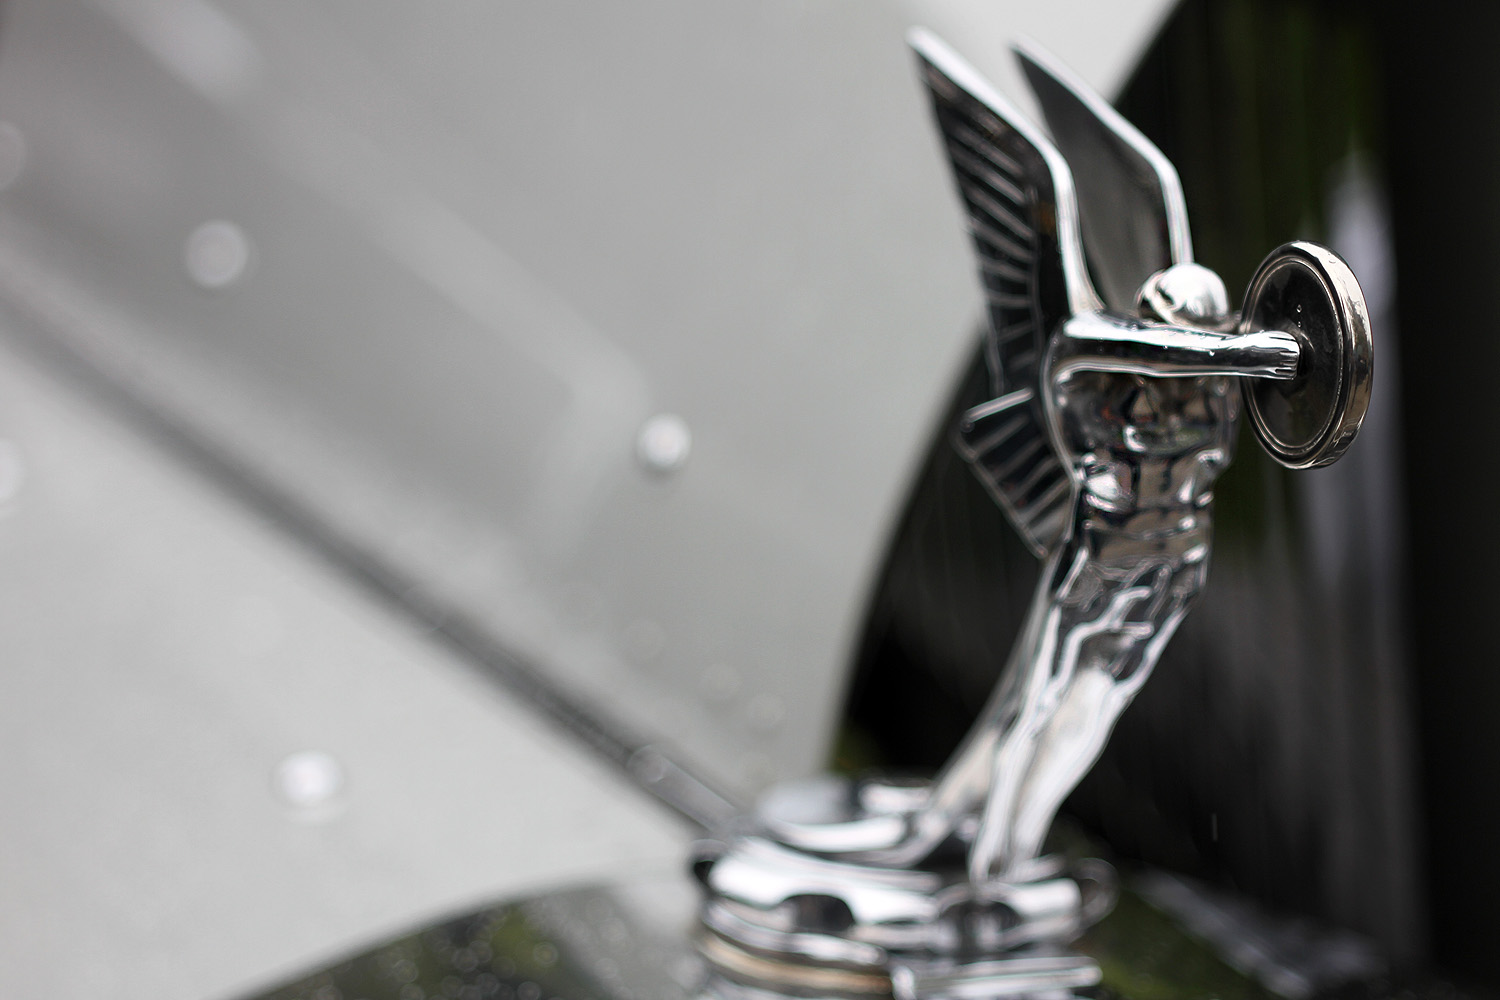 19 Hood Ornaments That Turn Luxury Cars Into Masterpieces